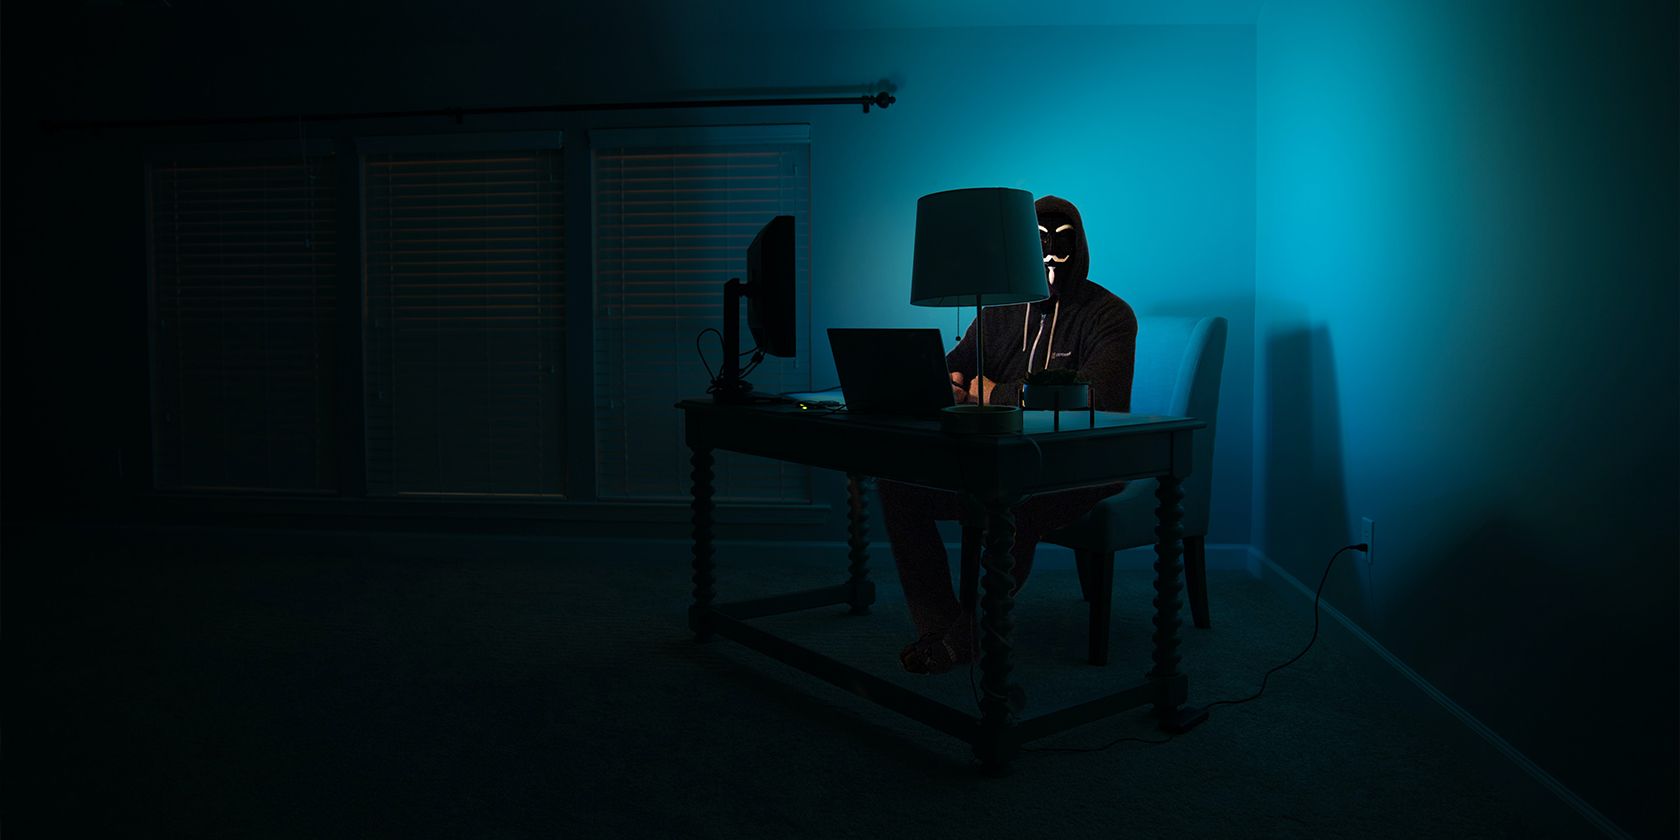 online predator sitting in front of a computer